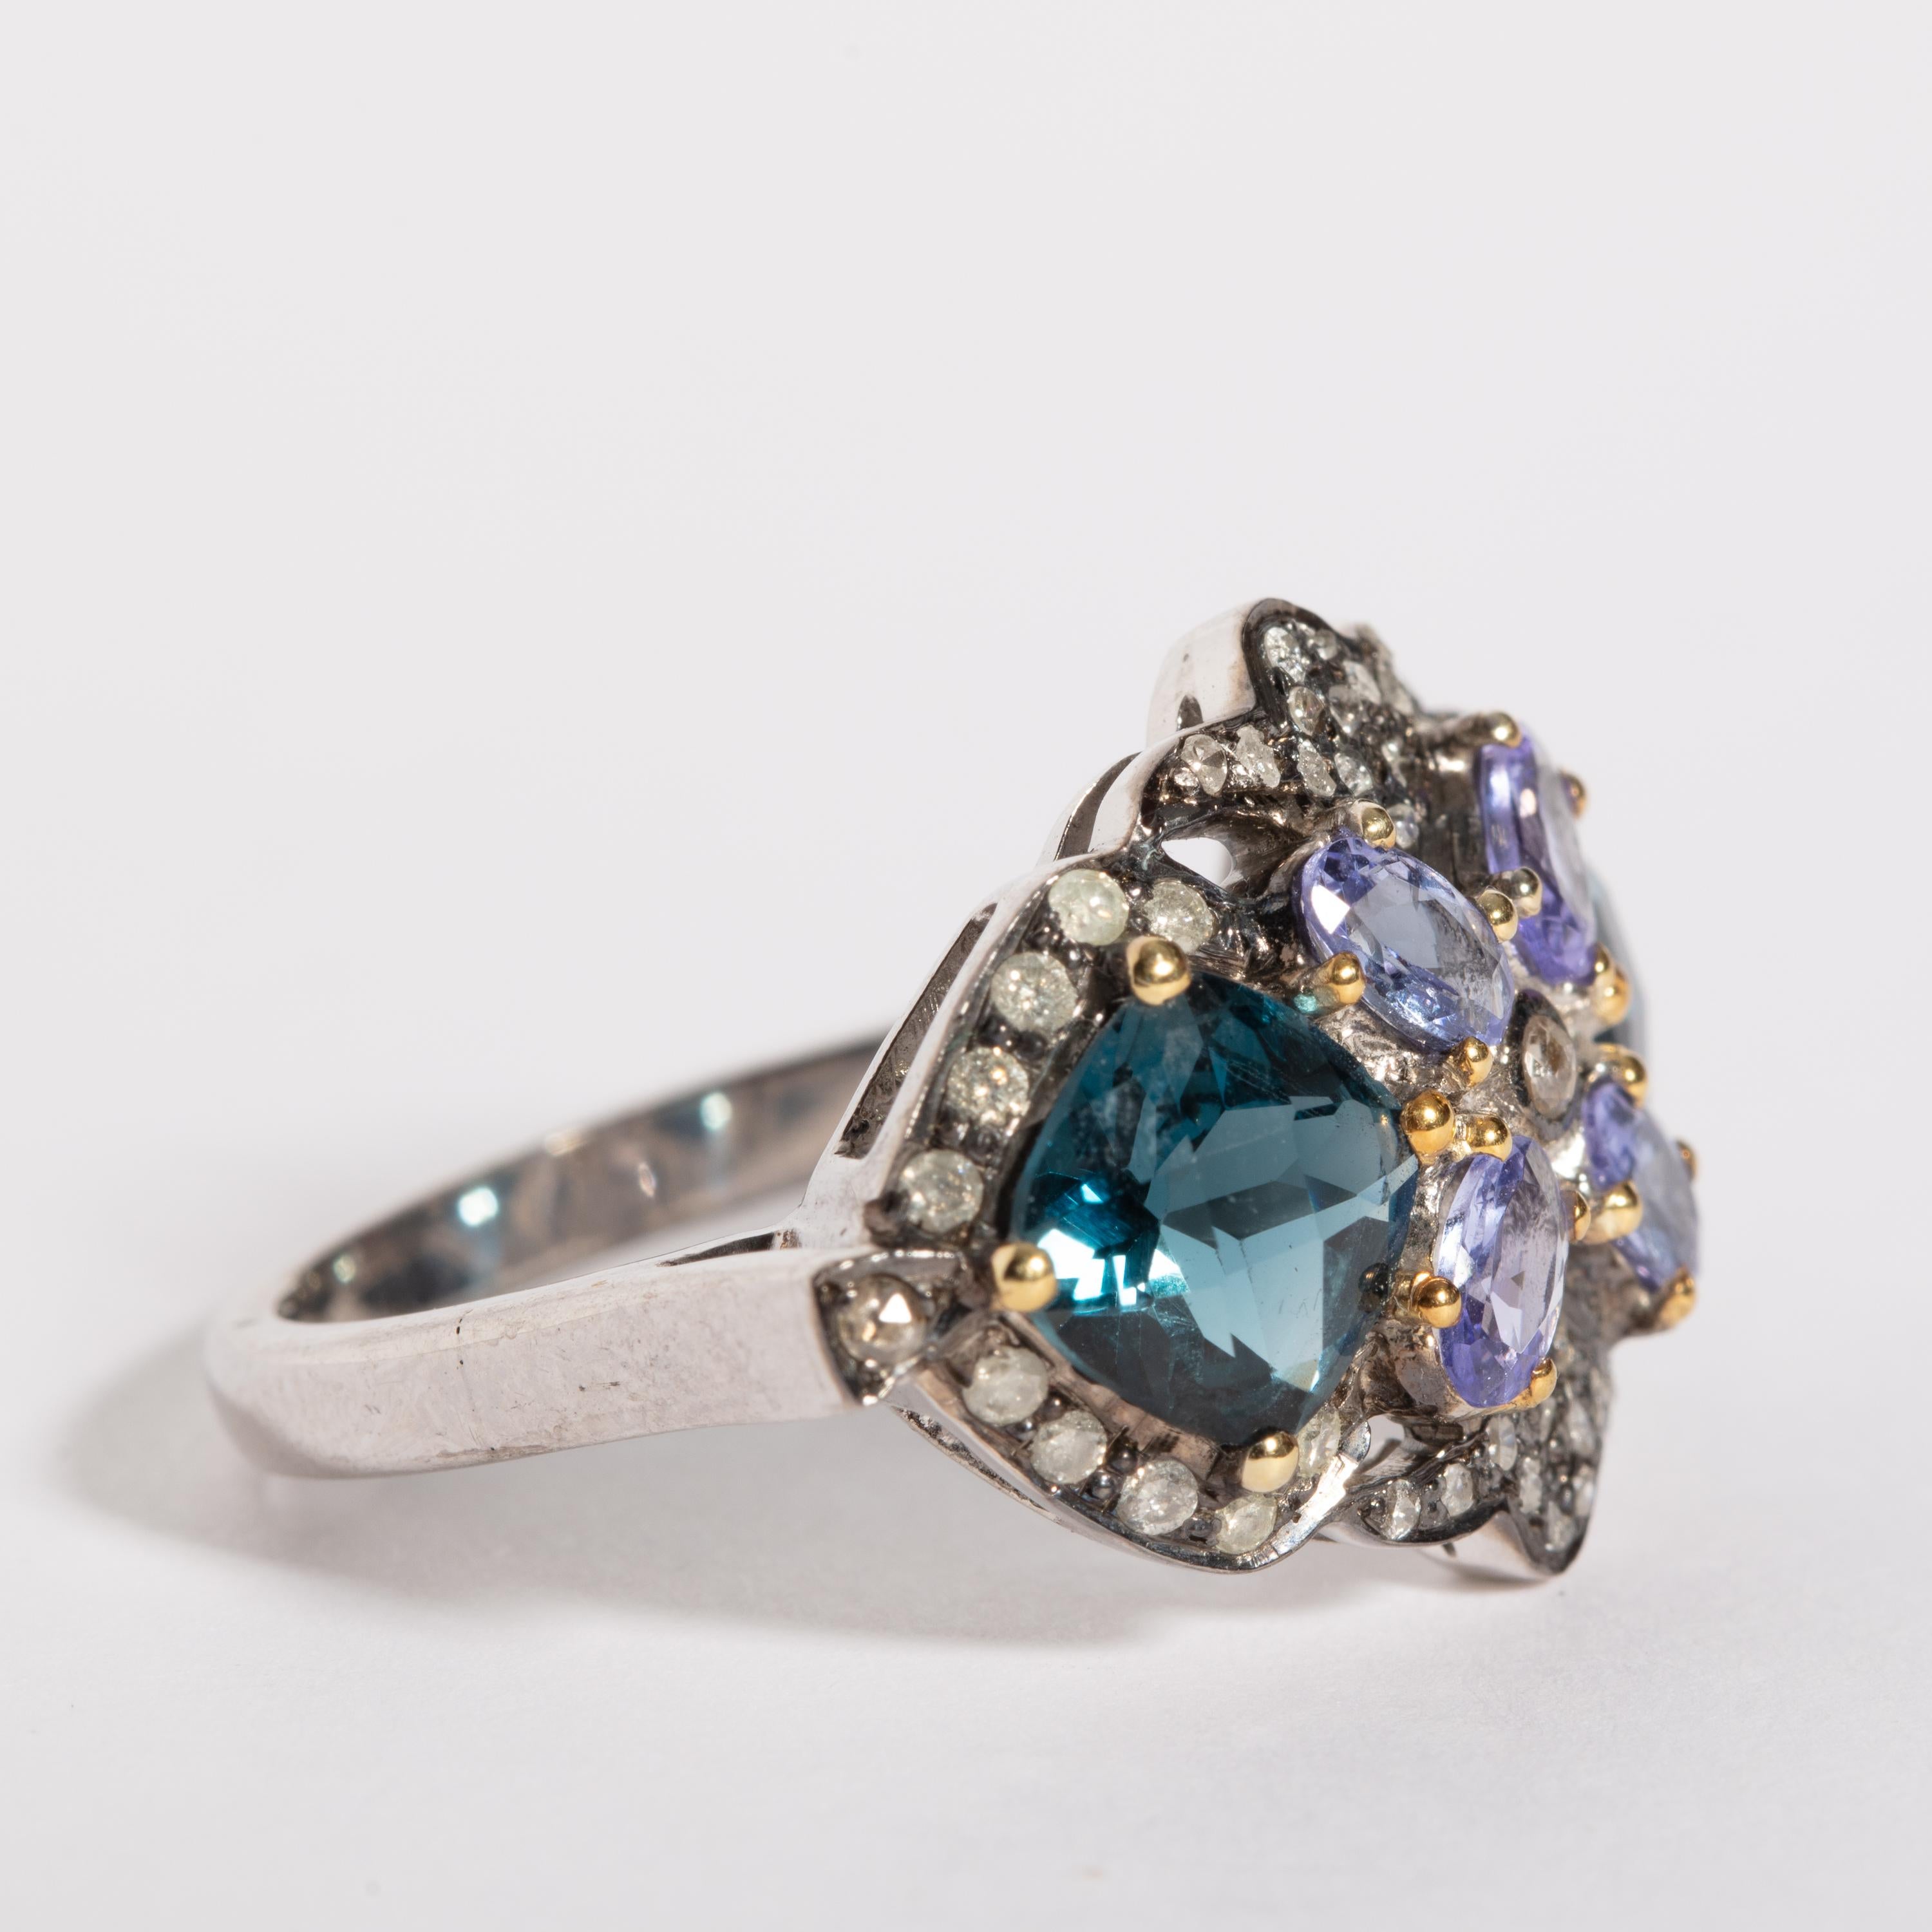 A cluster of faceted round blue topaz with faceted oval tanzanite stones, all bordered with brilliant-cut diamonds. Set in sterling silver. Weight of diamonds is .70 carats, tanzanite is .7 carats and blue topaz total 3 carats. Ring size is 7.75.